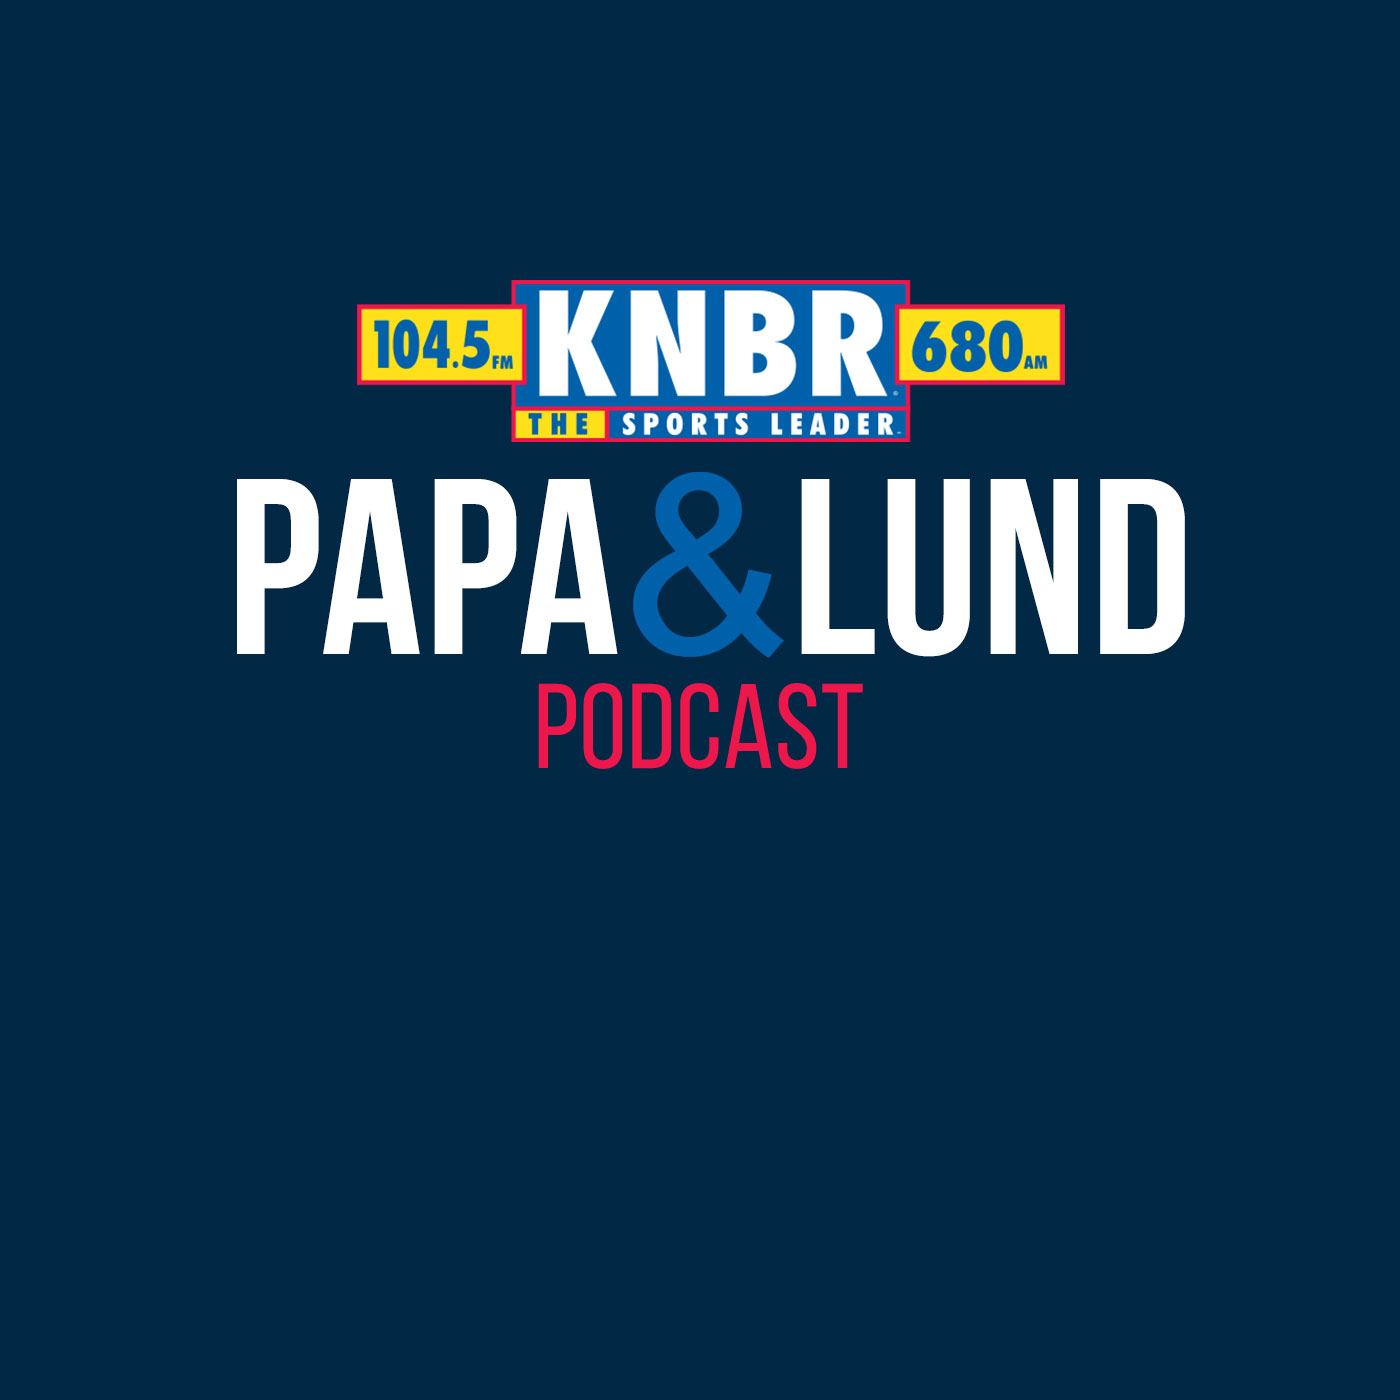 2-01 Pete Putila joins Papa & Lund talks Carlos Correa, additions during the offseason, and why he decided to come to San Francisco